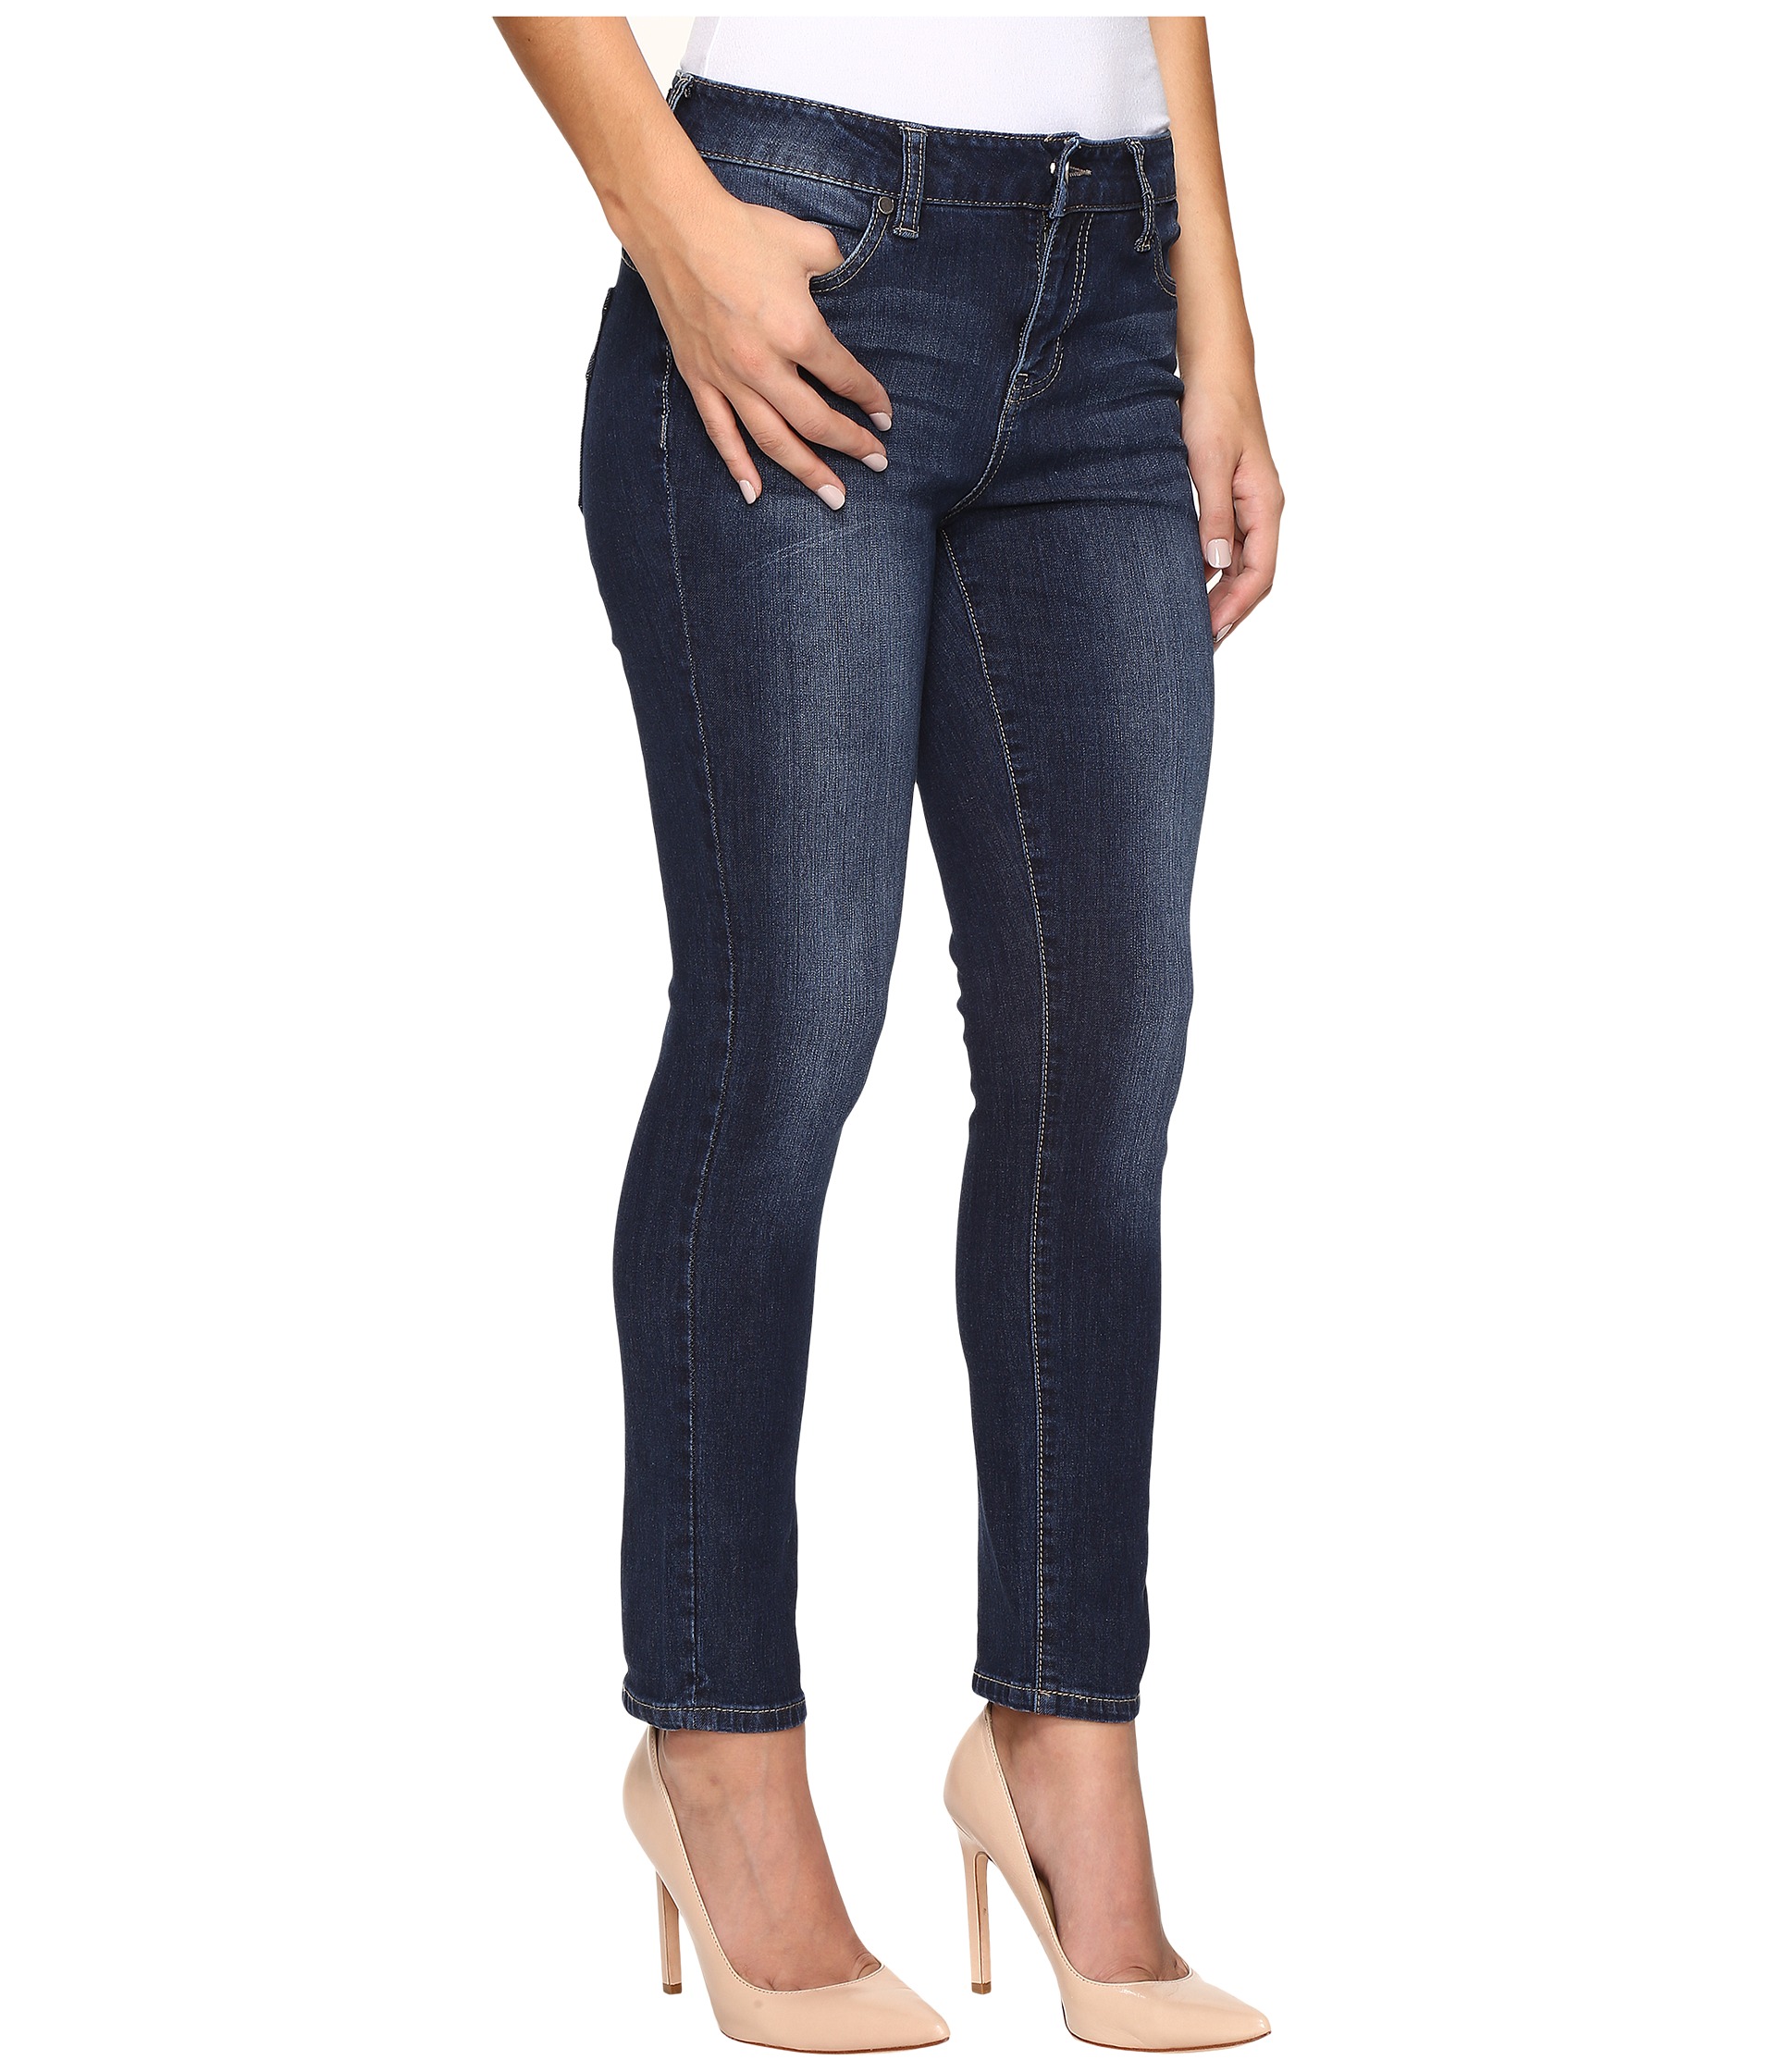 Liverpool Petite The Hugger 4-Way Stretch Skinny Jeans in Orion Medium ...